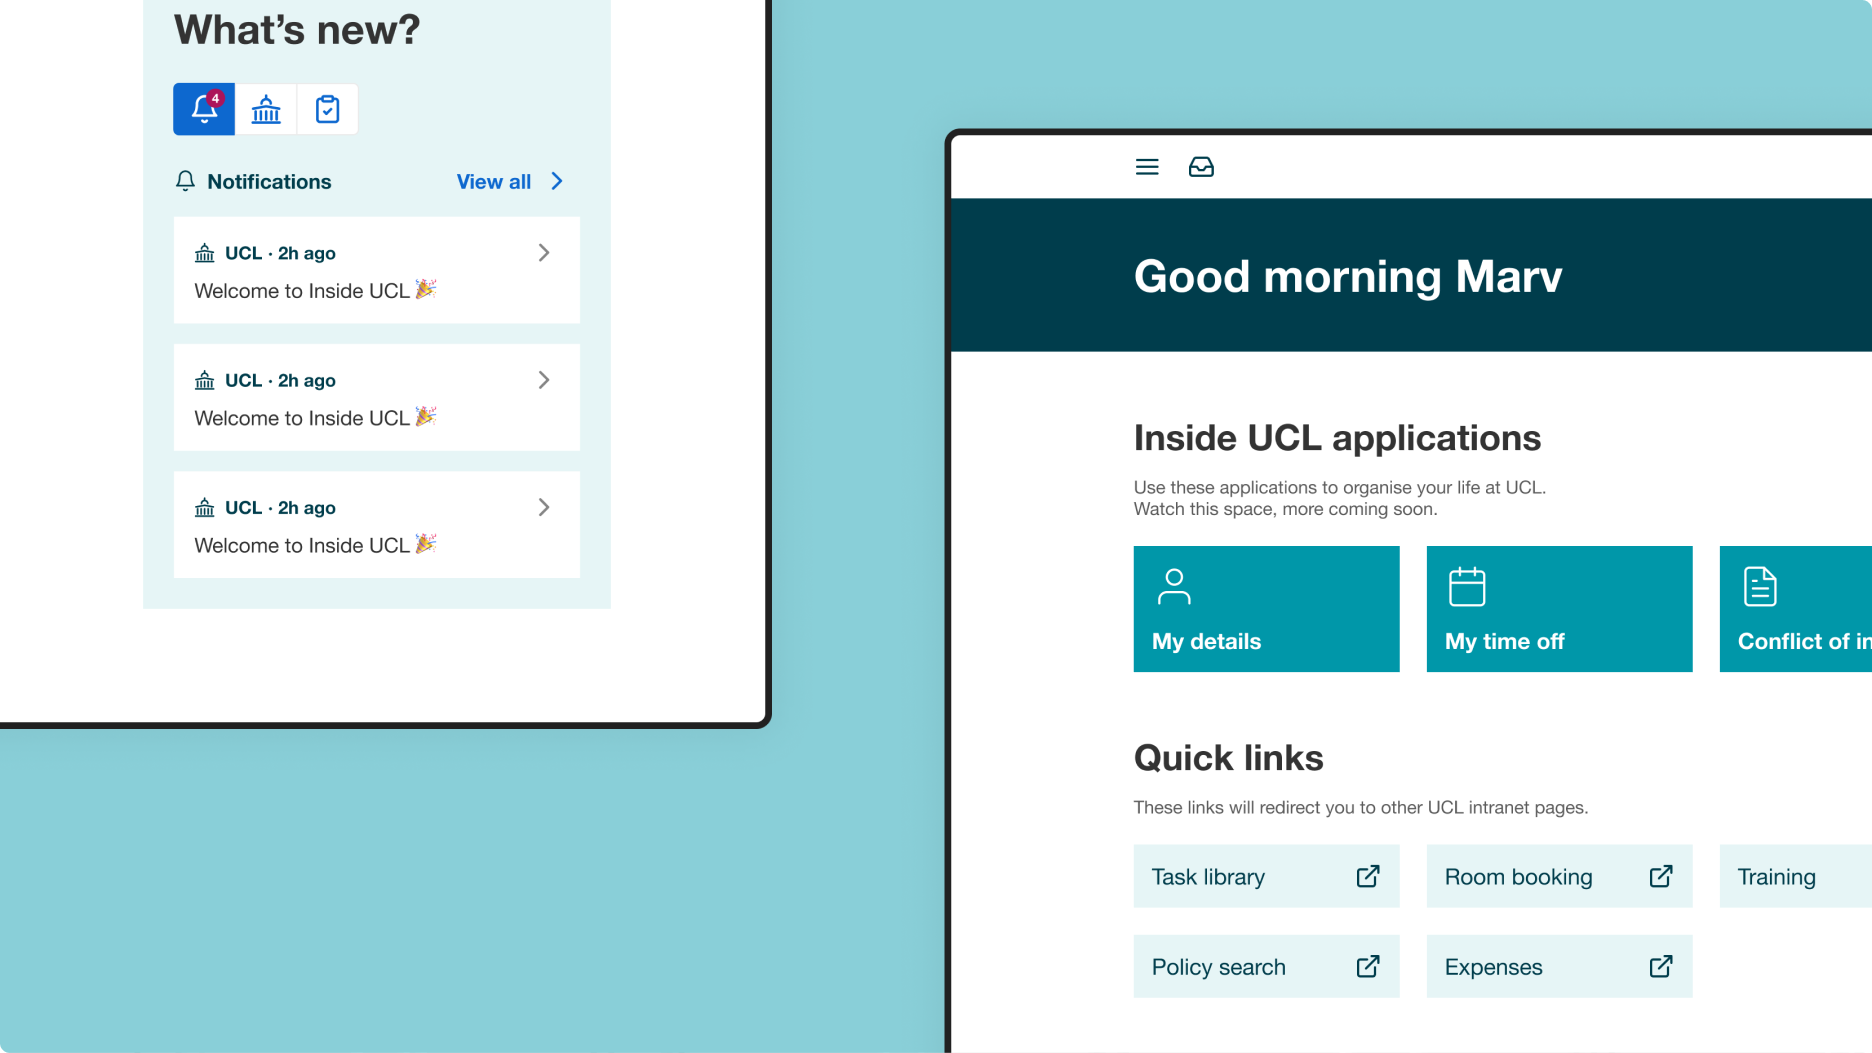 Screenshots of the UCL employee experience platform showing what's new and quick links